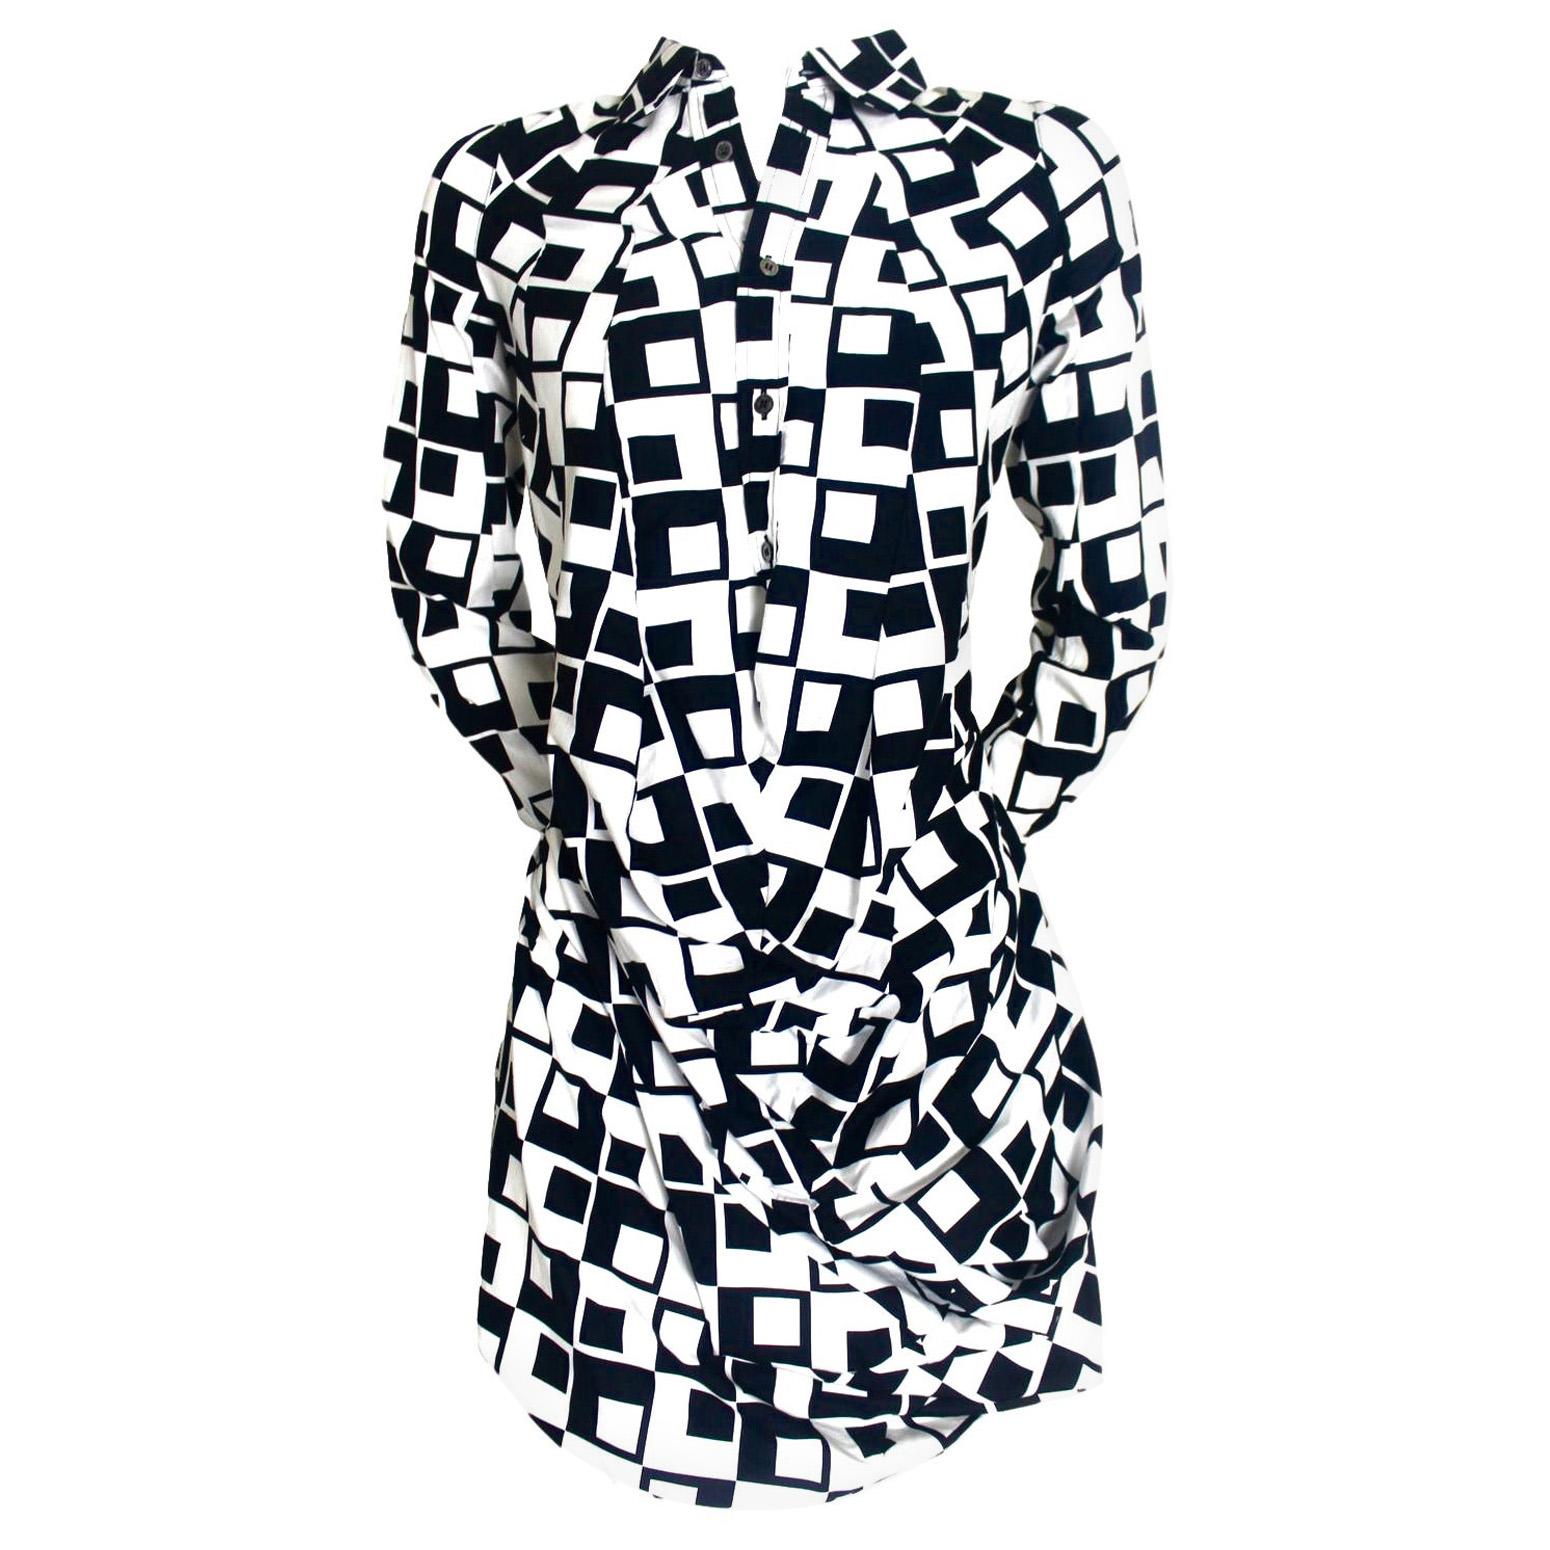 Comme des Garcons Junya Watanabe Geometric Dress AD 2009 For Sale